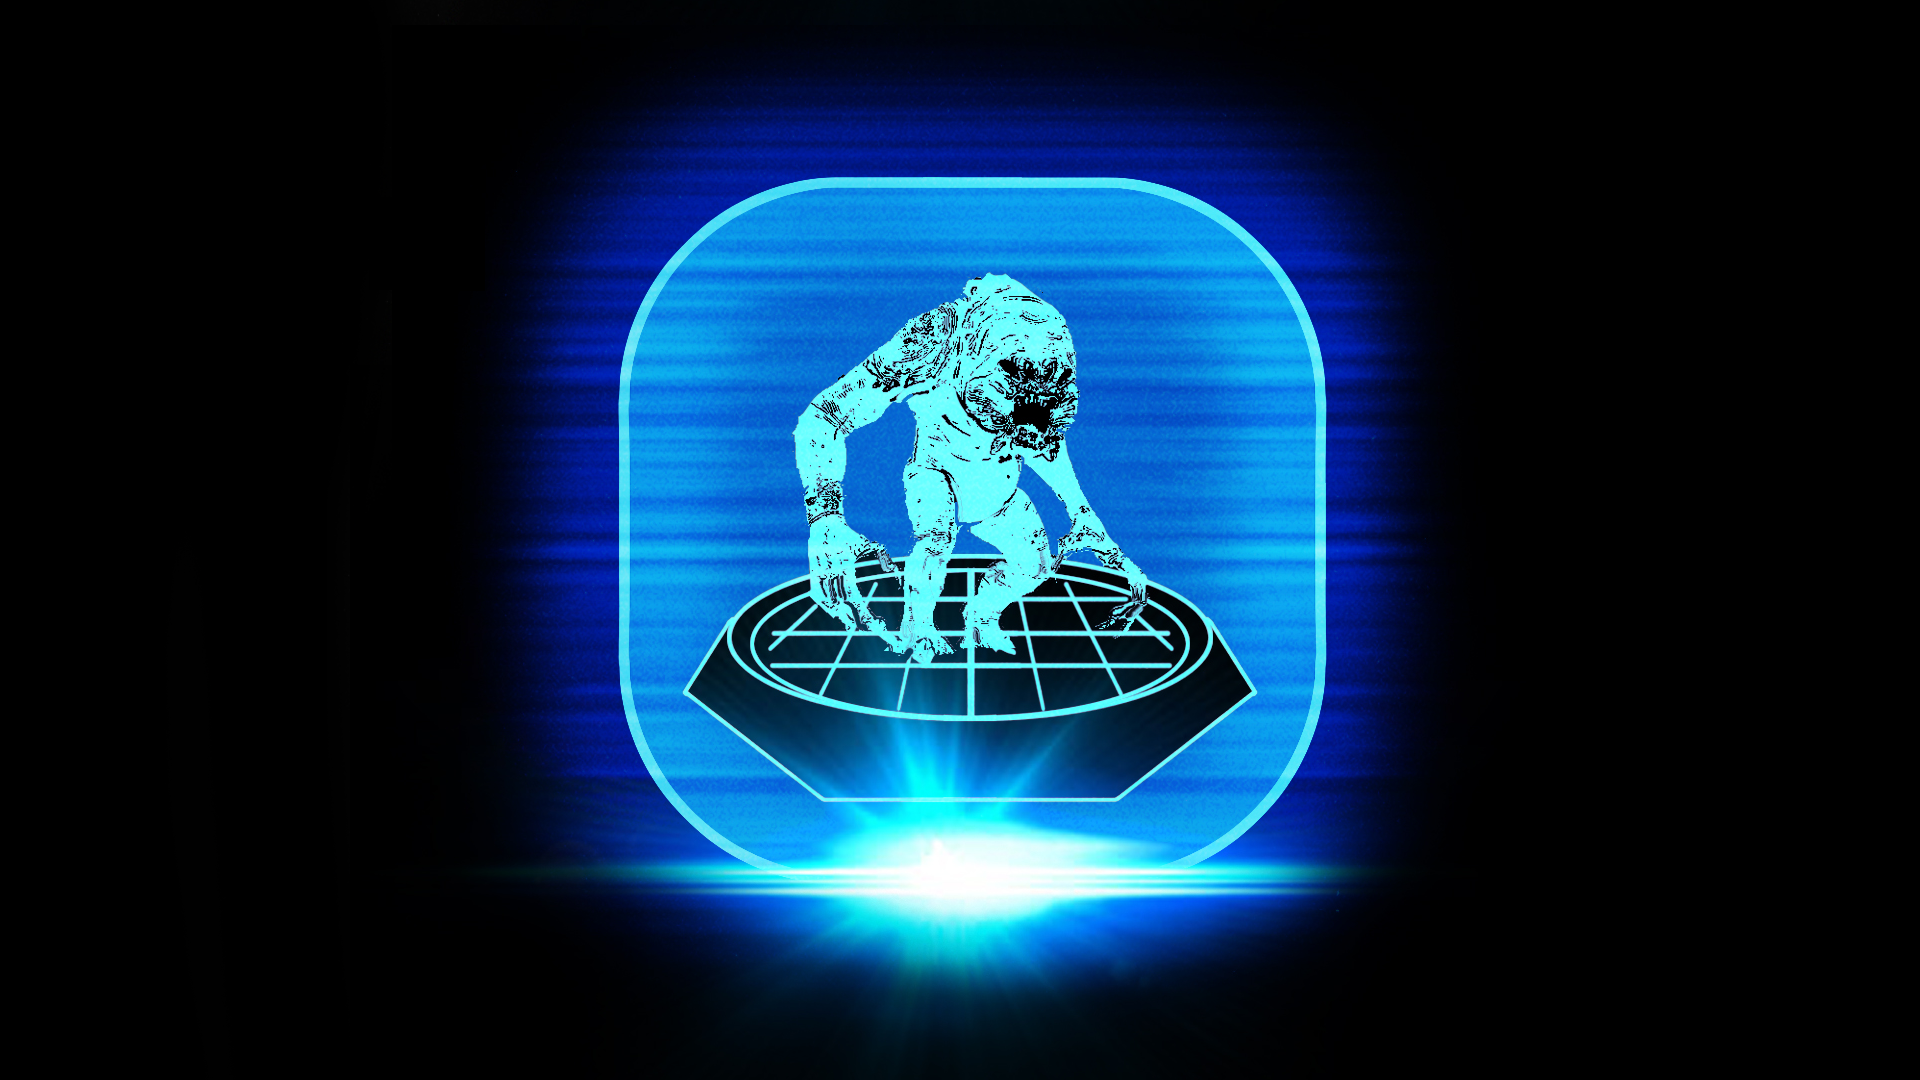 Icon for Gambler